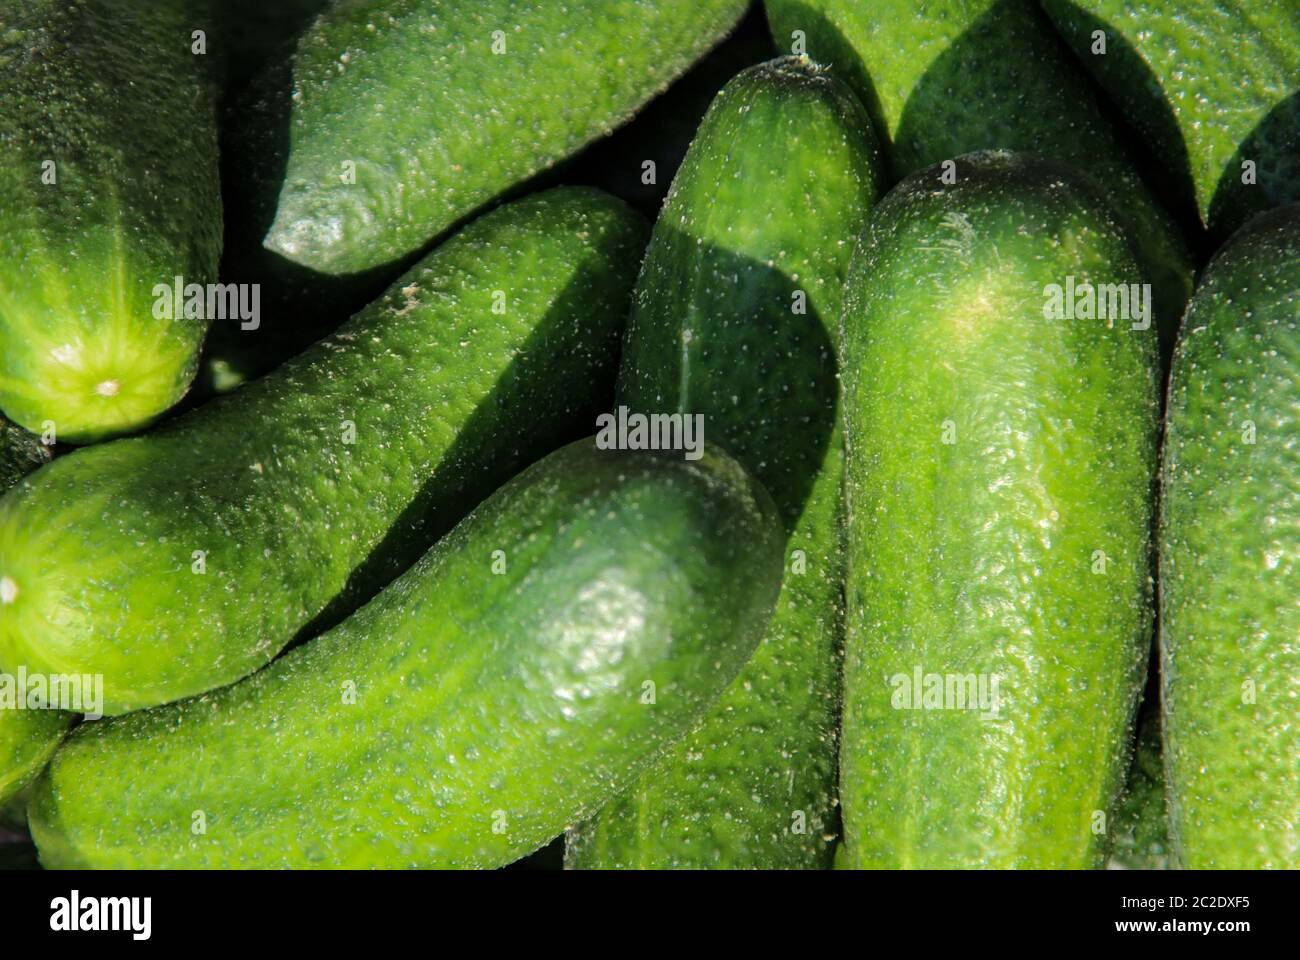 Vegetable cucumbers are freshly washed in a bowl Stock Photo